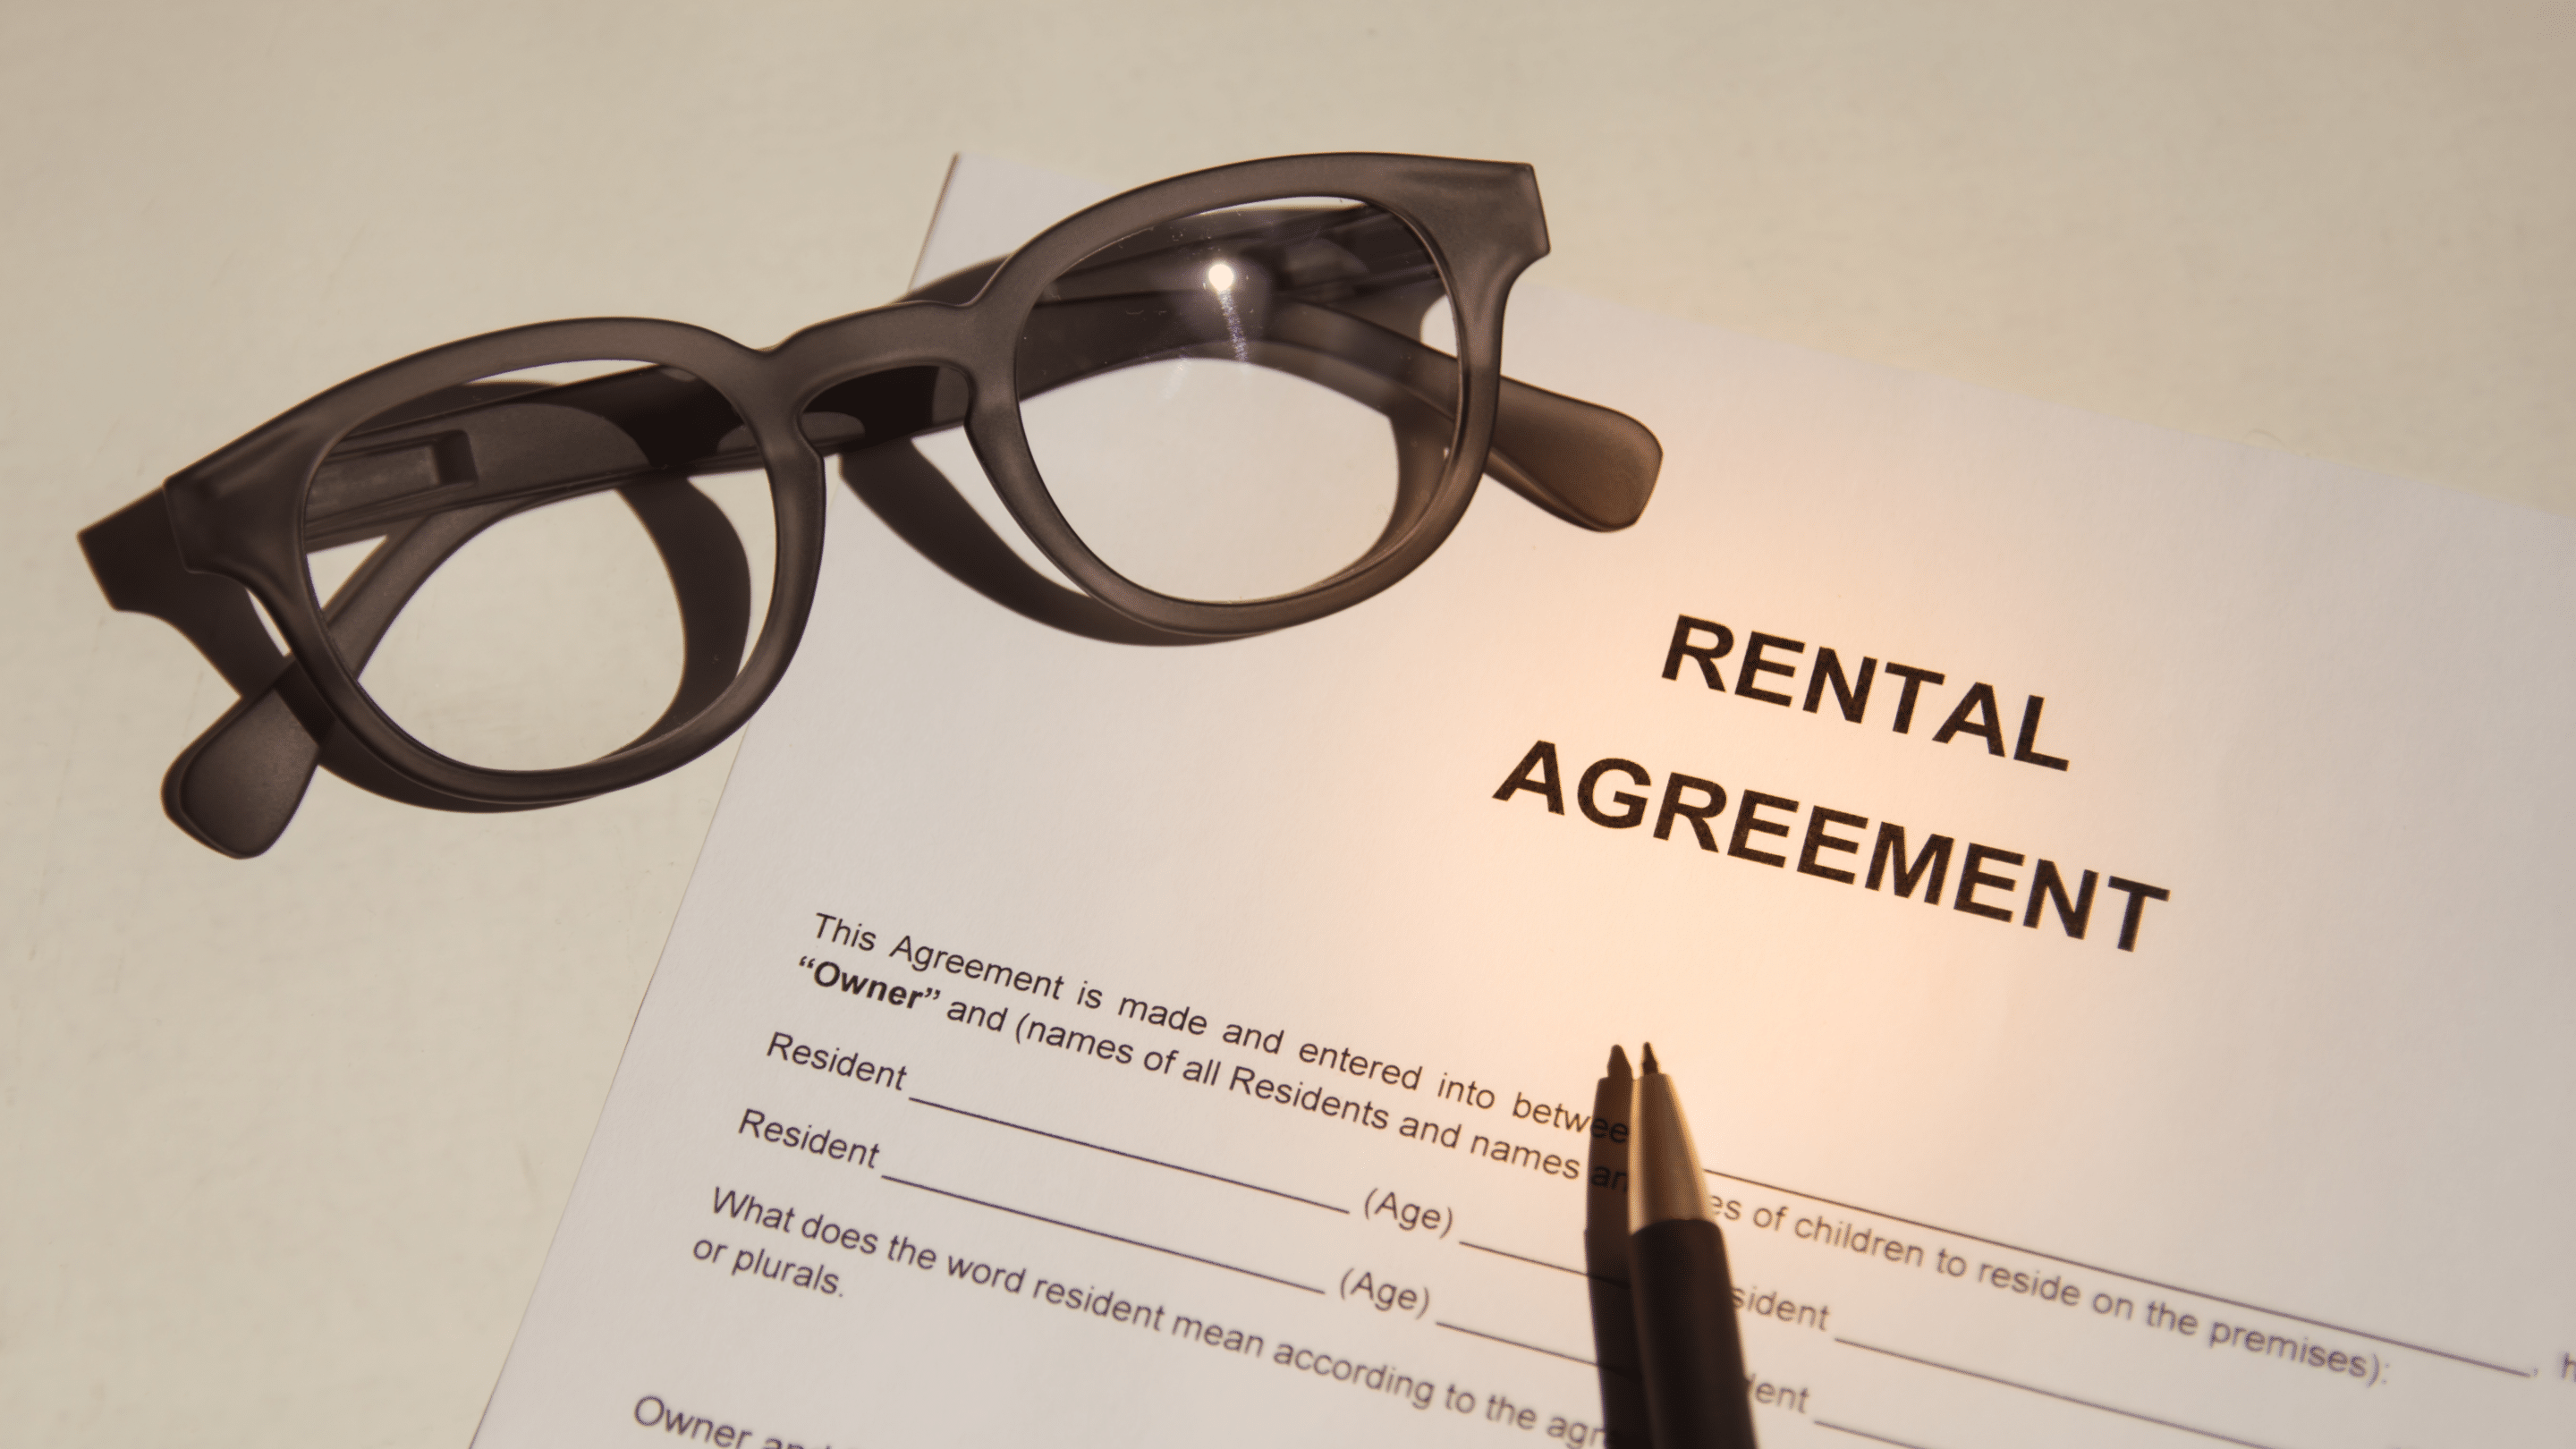 Rental Agreement of Prohibitions